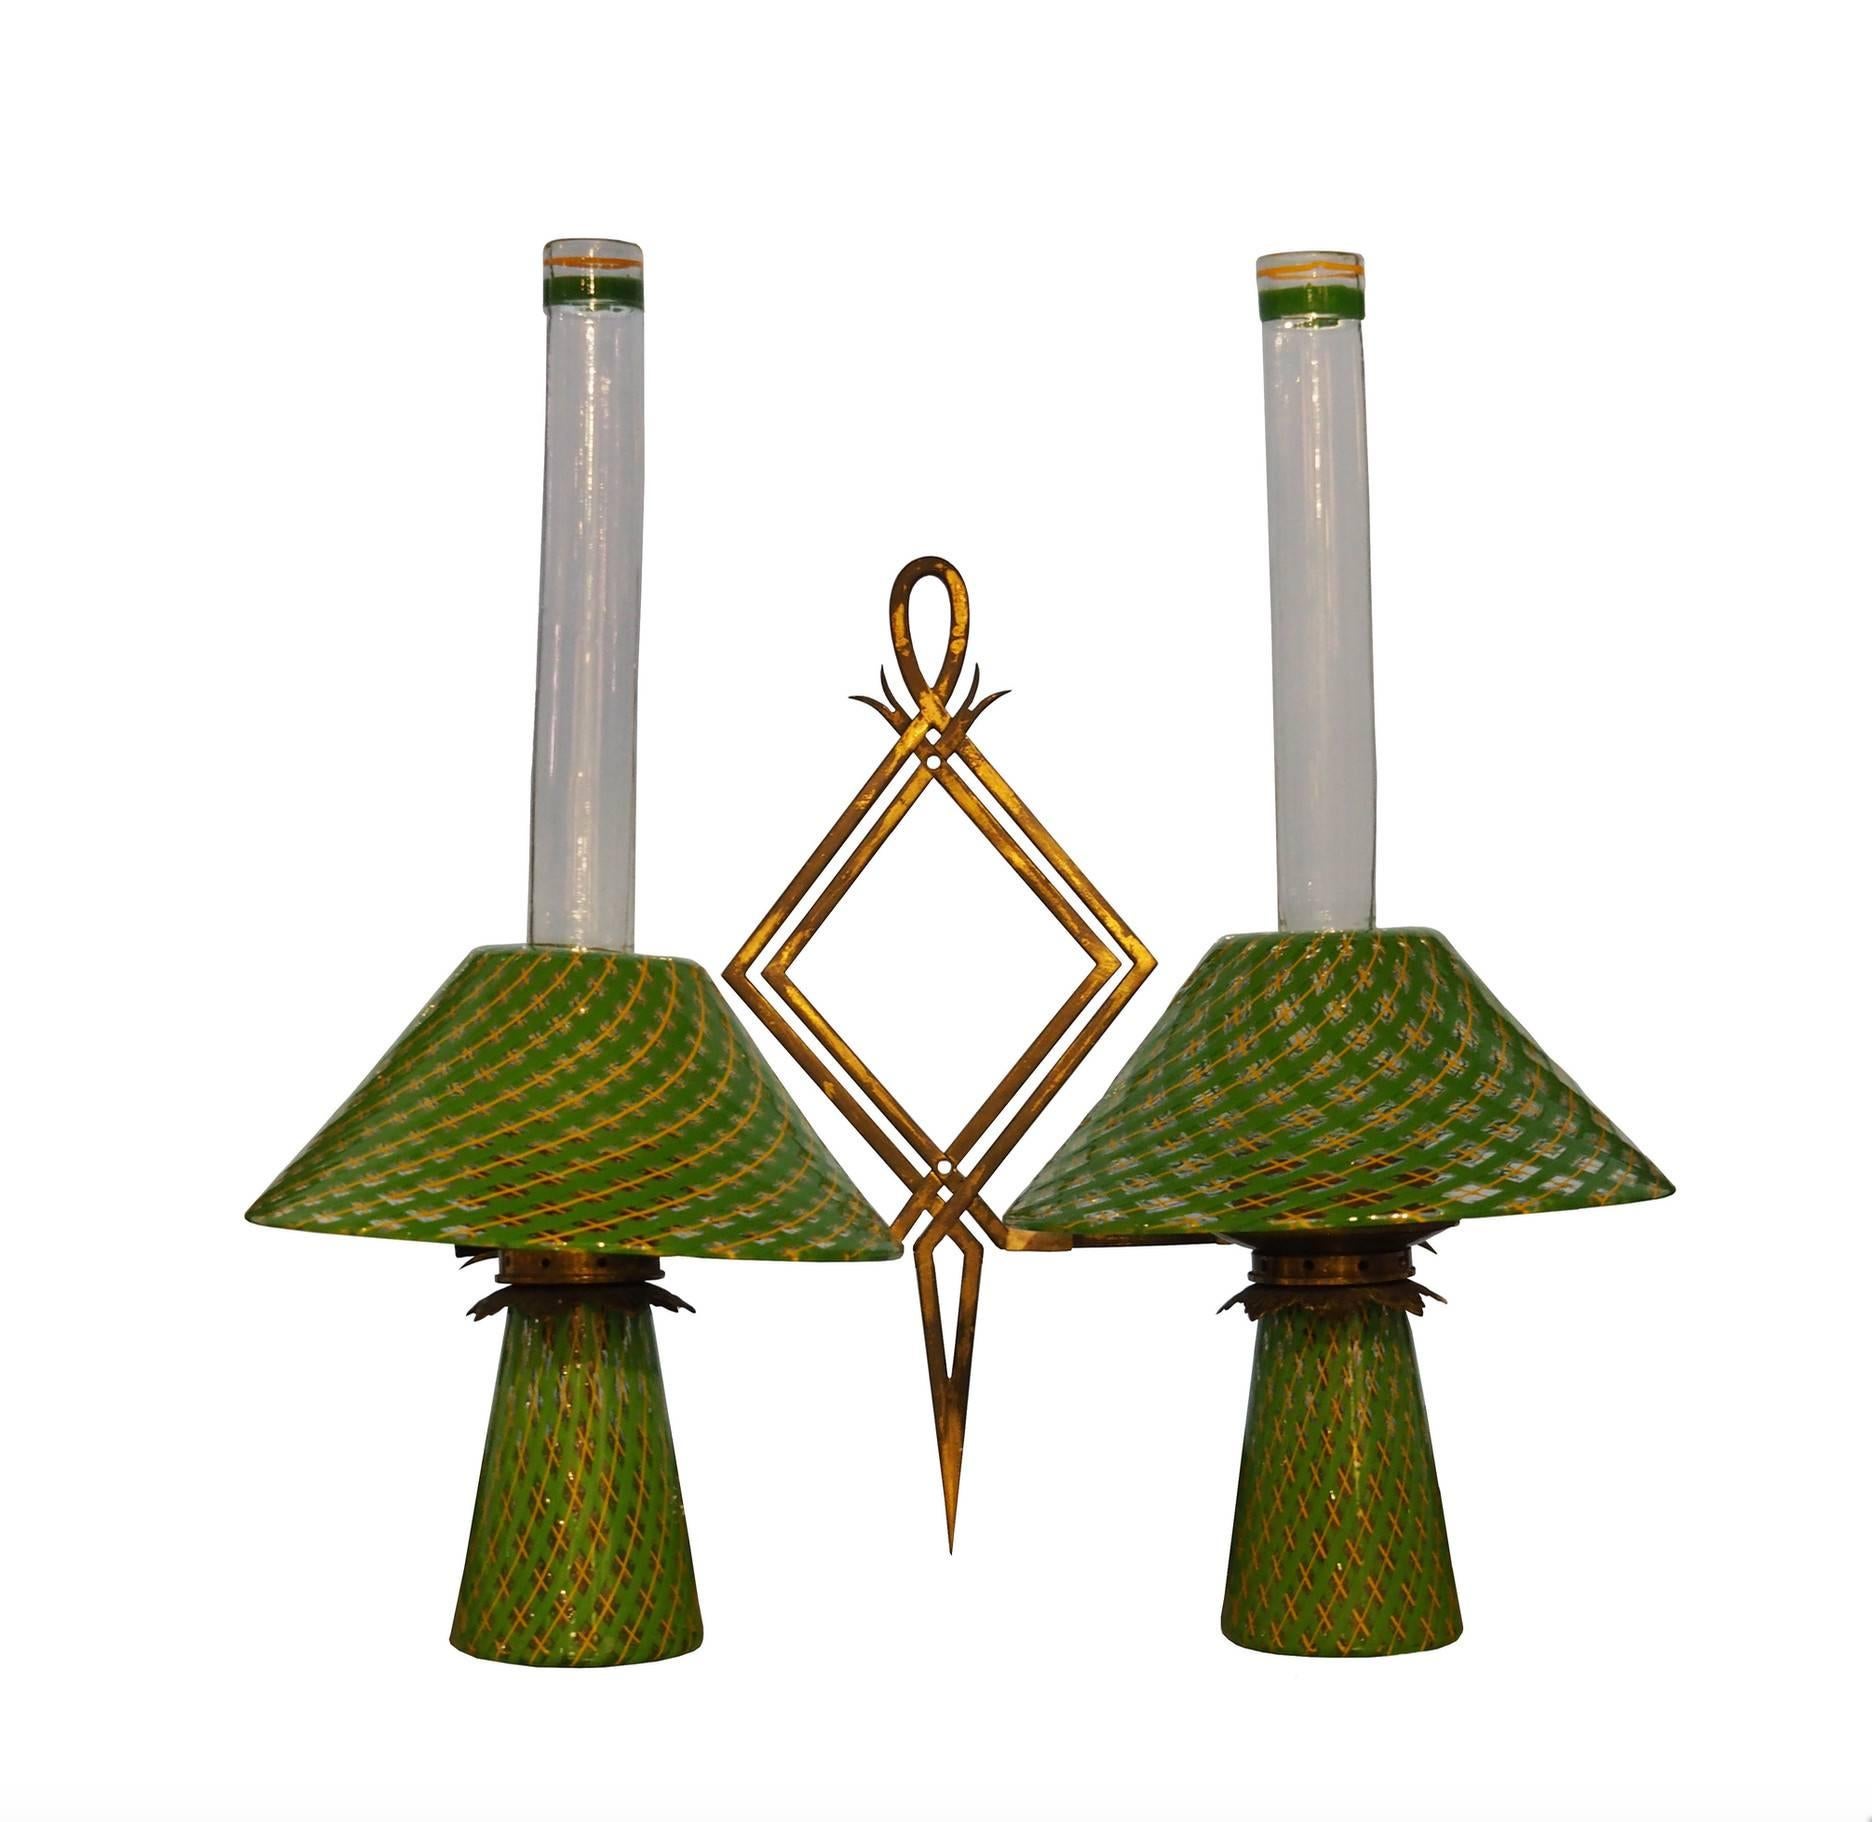 Pair of appliques designed by Flavio Poli and produced by Seguso Vetri d'Arte in 1950s. Each piece is composed by two lamps on a brass frame. The execution of “reticello” glass is really exquisitely done, so the object looks very sophisticated and